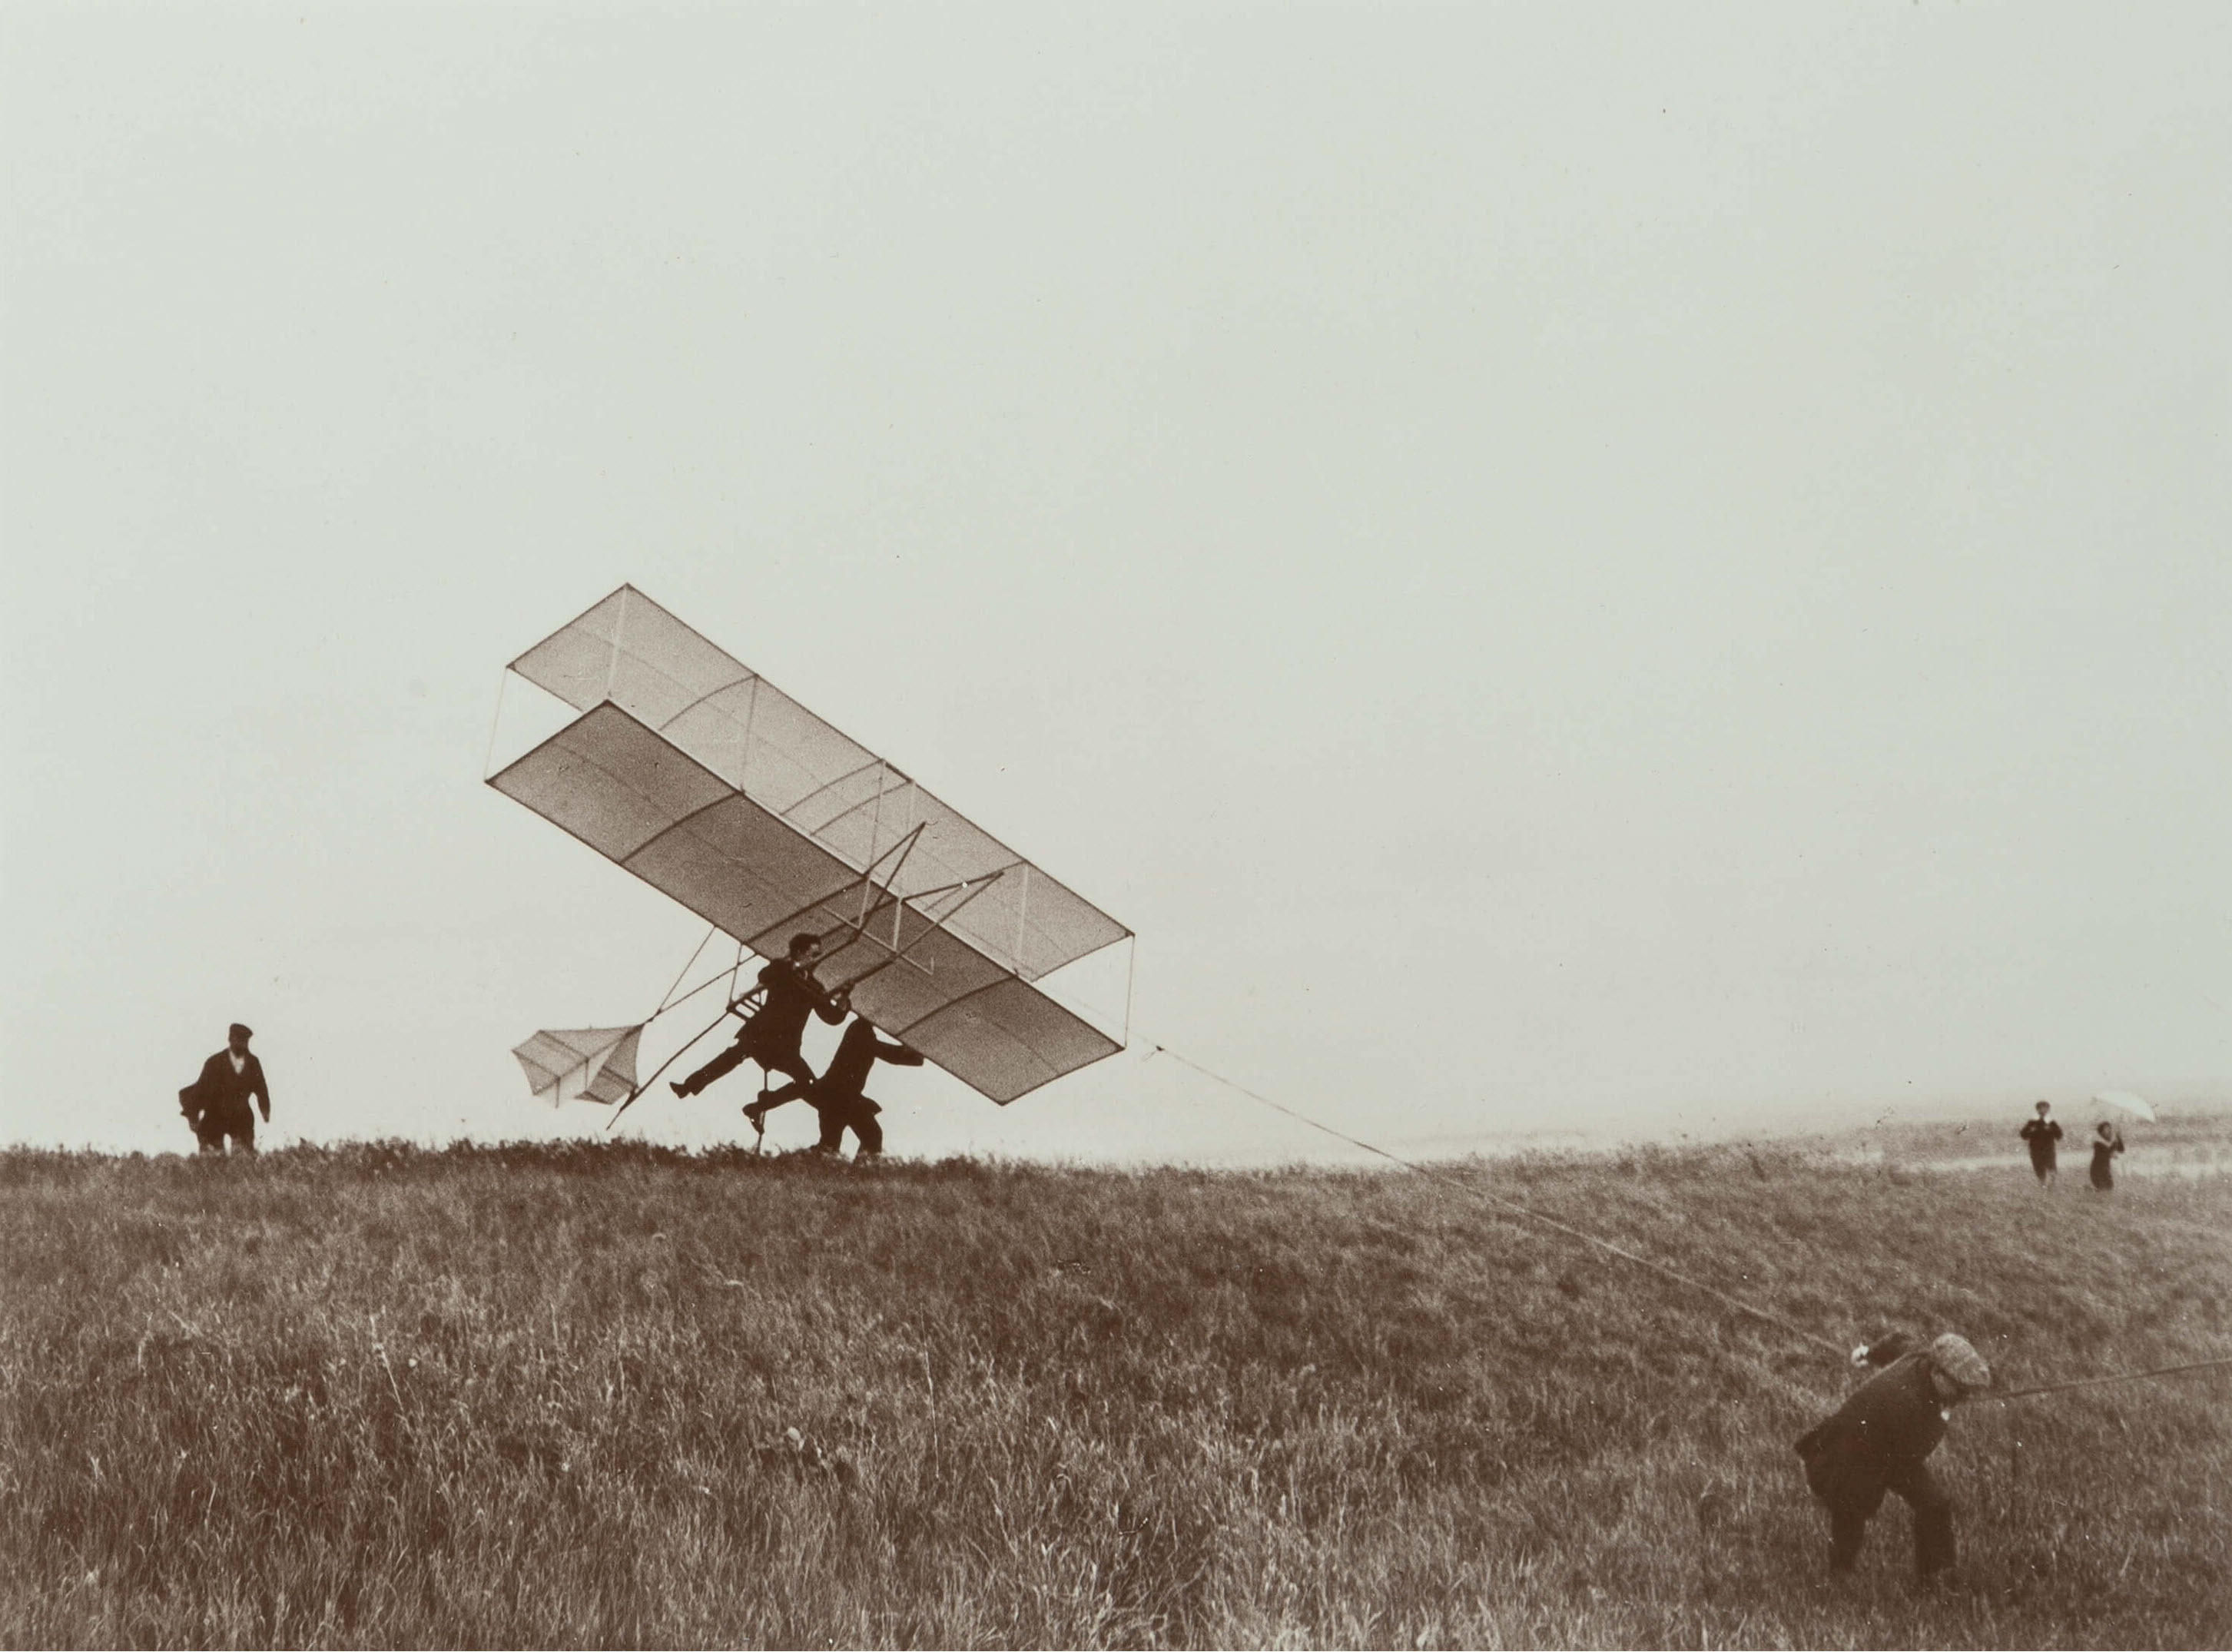 My Brother, Zissou, gets his glider airborne, Chateau de Rouza, 1908.jpg